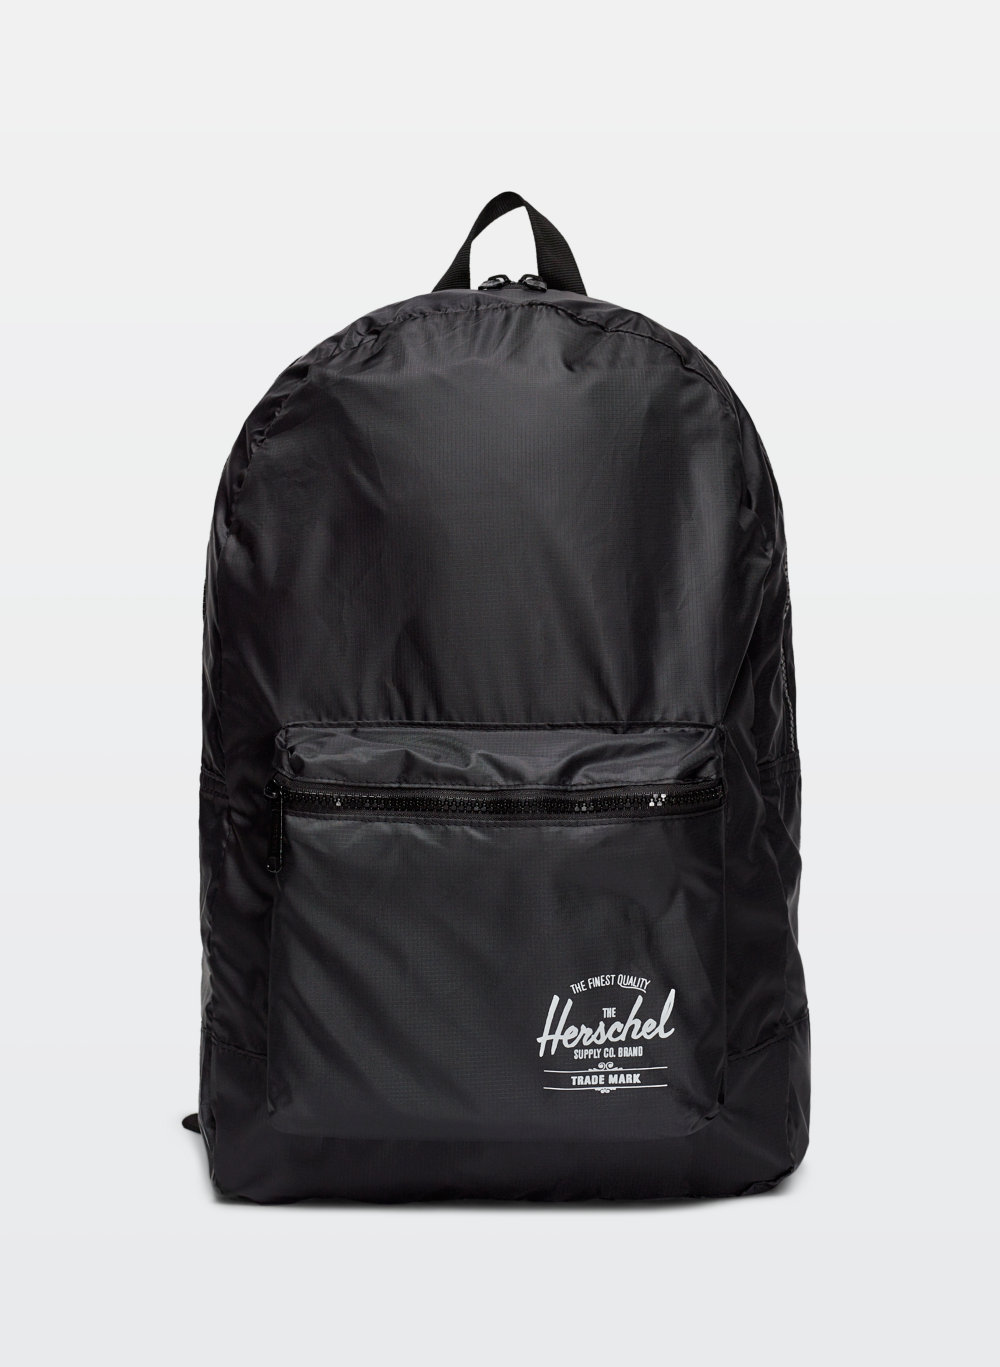 aer packable daypack